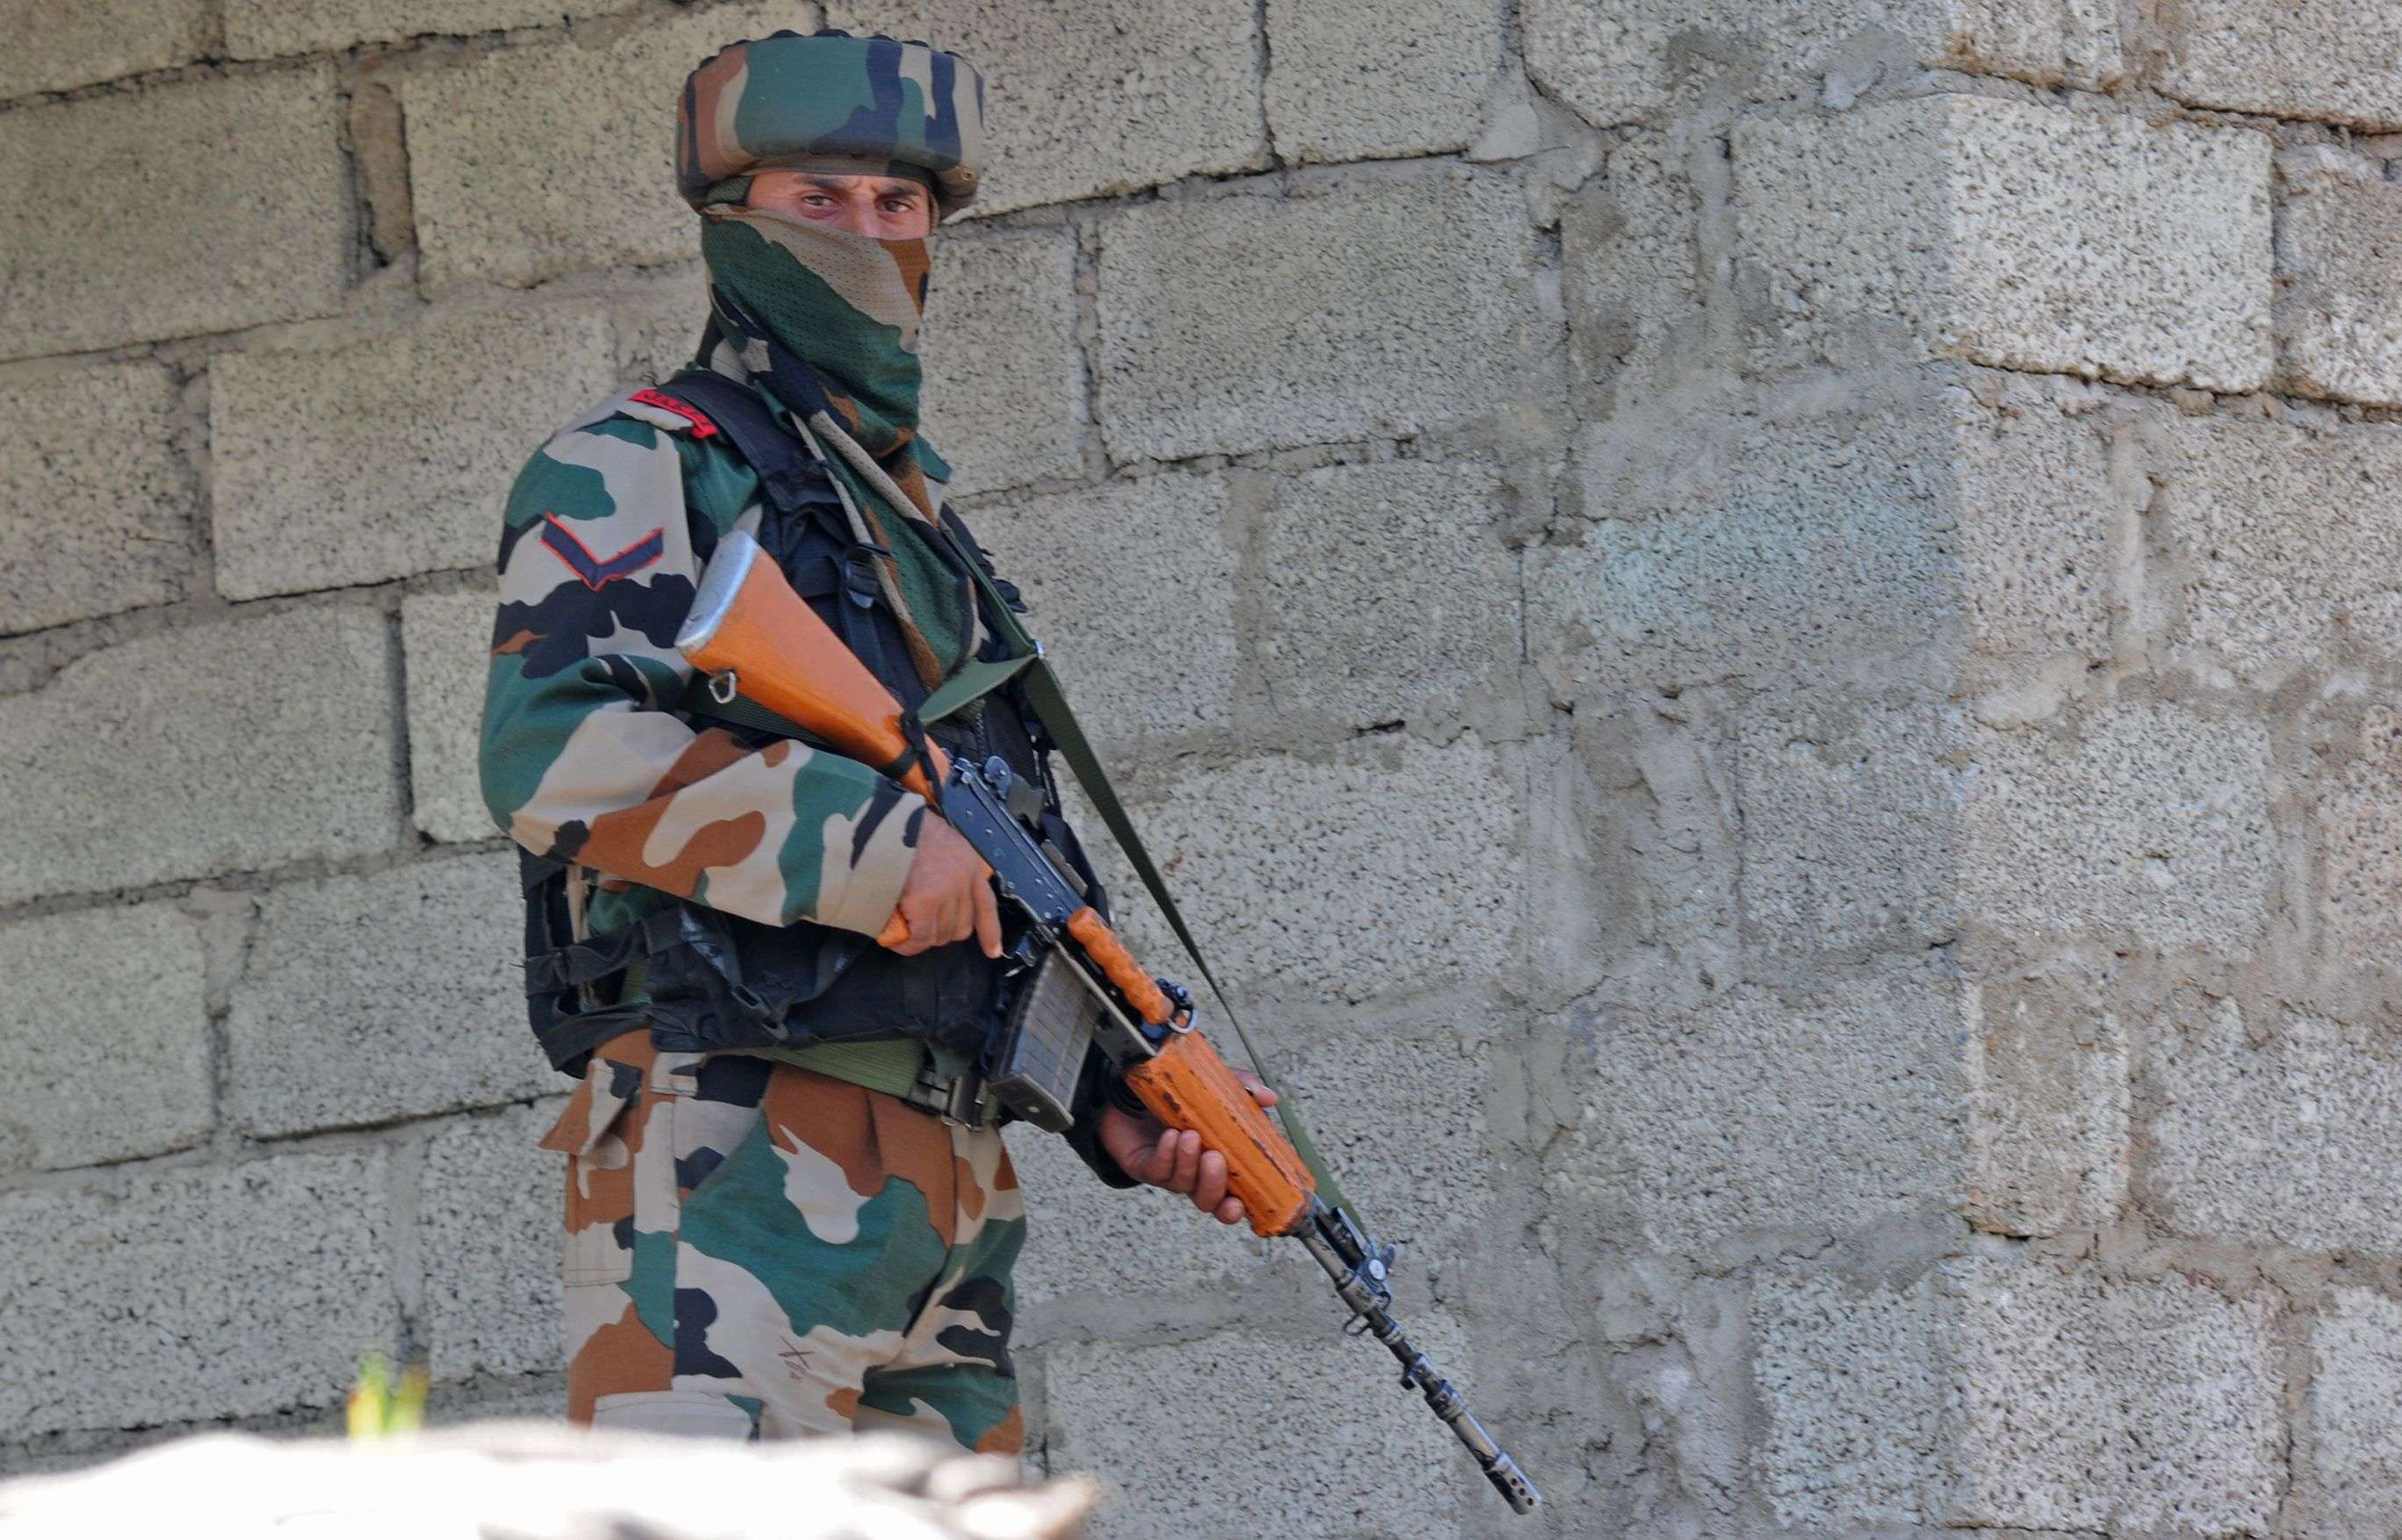 An Indian army soldier takes up a position near the site of a gunbattle between Indian army soldiers and rebels inside an army brigade headquarters near the border with Pakistan, known as the Line of Control (LoC), in Uri on September 18, 2016. Militants armed with guns and grenades killed 17 soldiers in a raid September 18 on an army base in Indian-administered Kashmir, the worst such attack for more than a decade in the disputed Himalayan region. / AFP PHOTO / TAUSEEF MUSTAFA